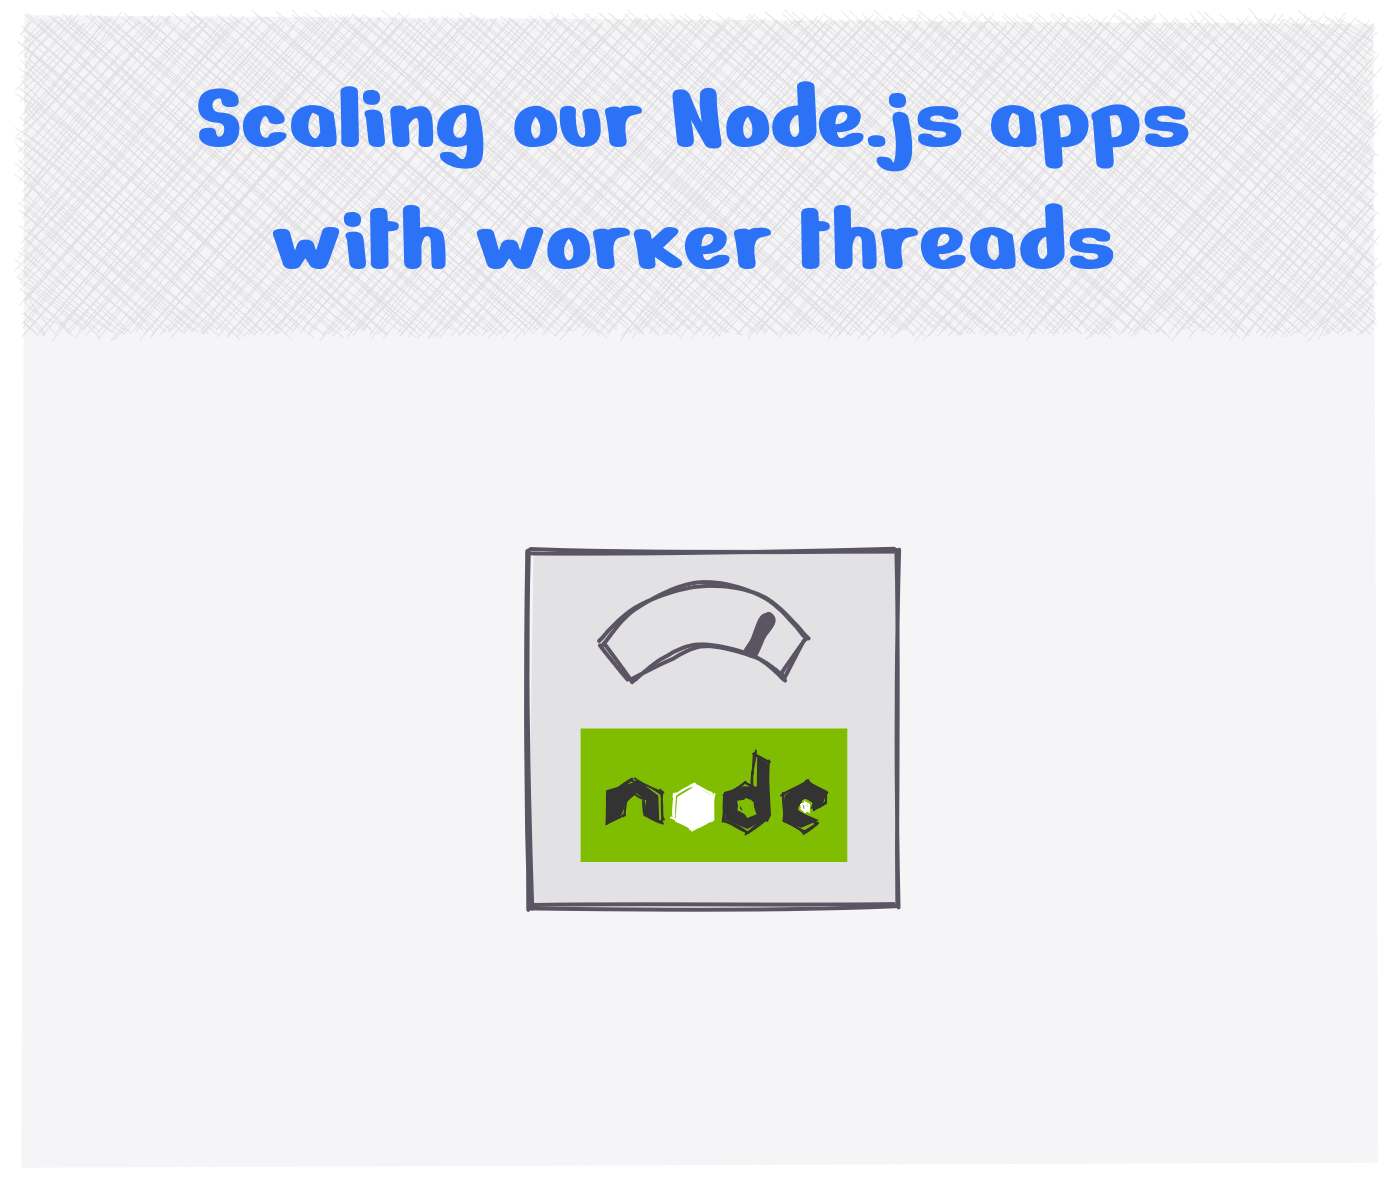 How do we scale our Node.js applications with worker threads?